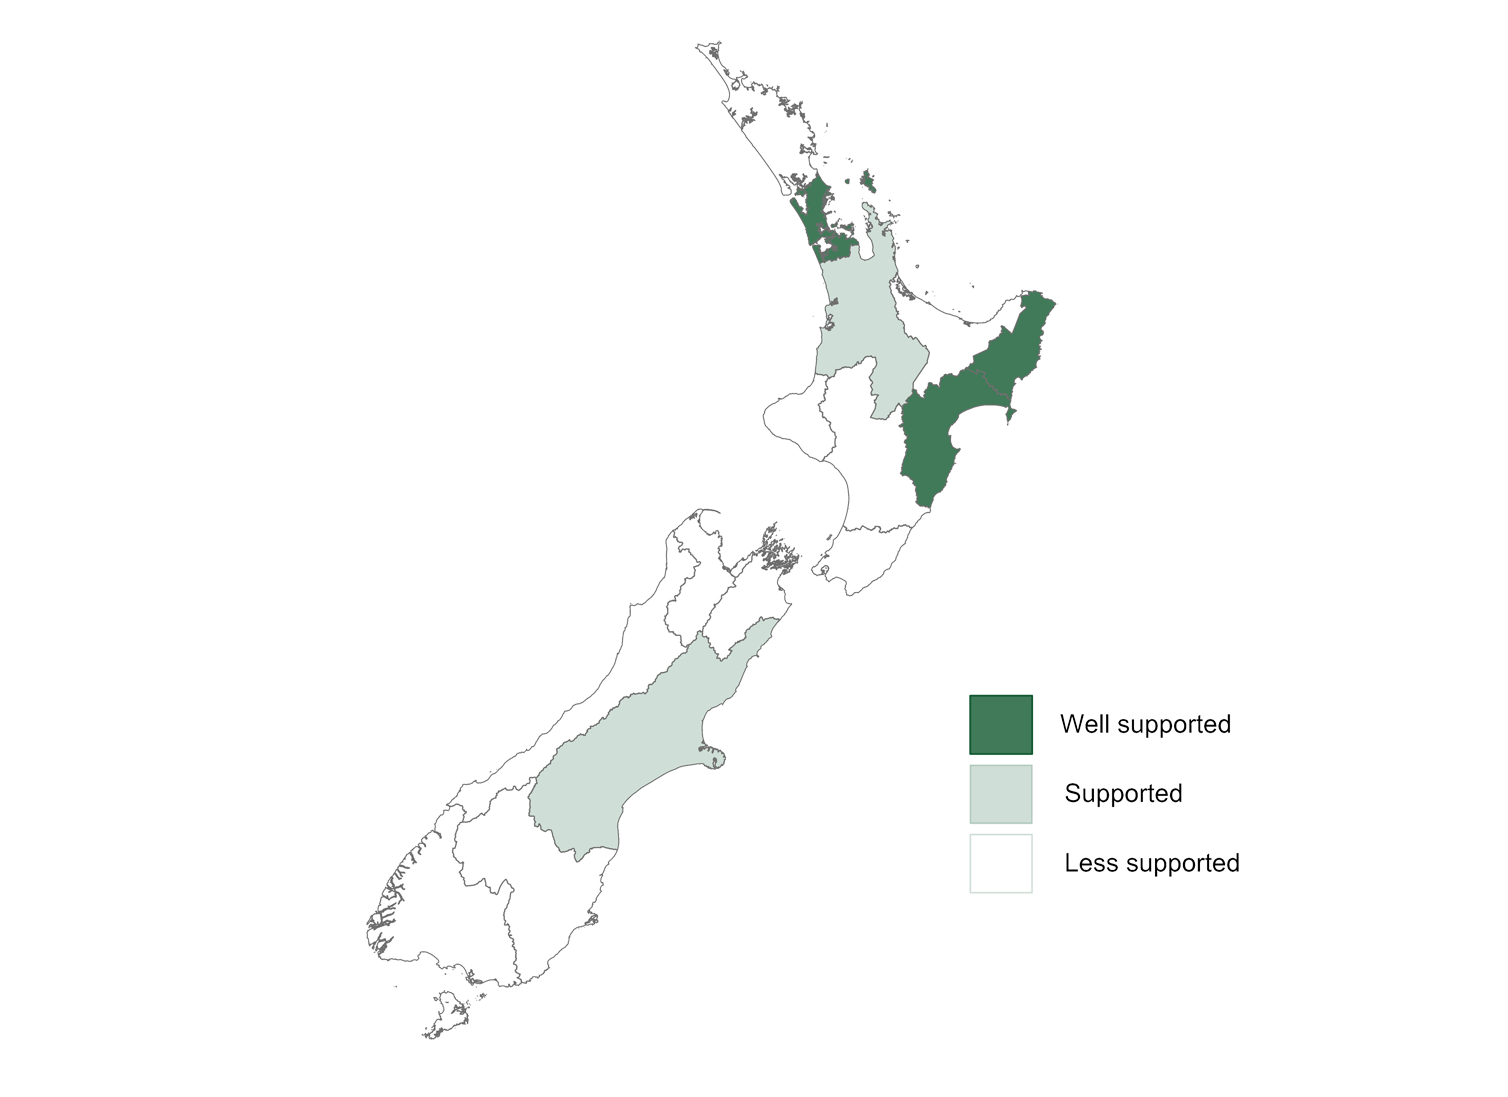 New Zealand map highlighting the best regions for commercial buttercup squash growing.